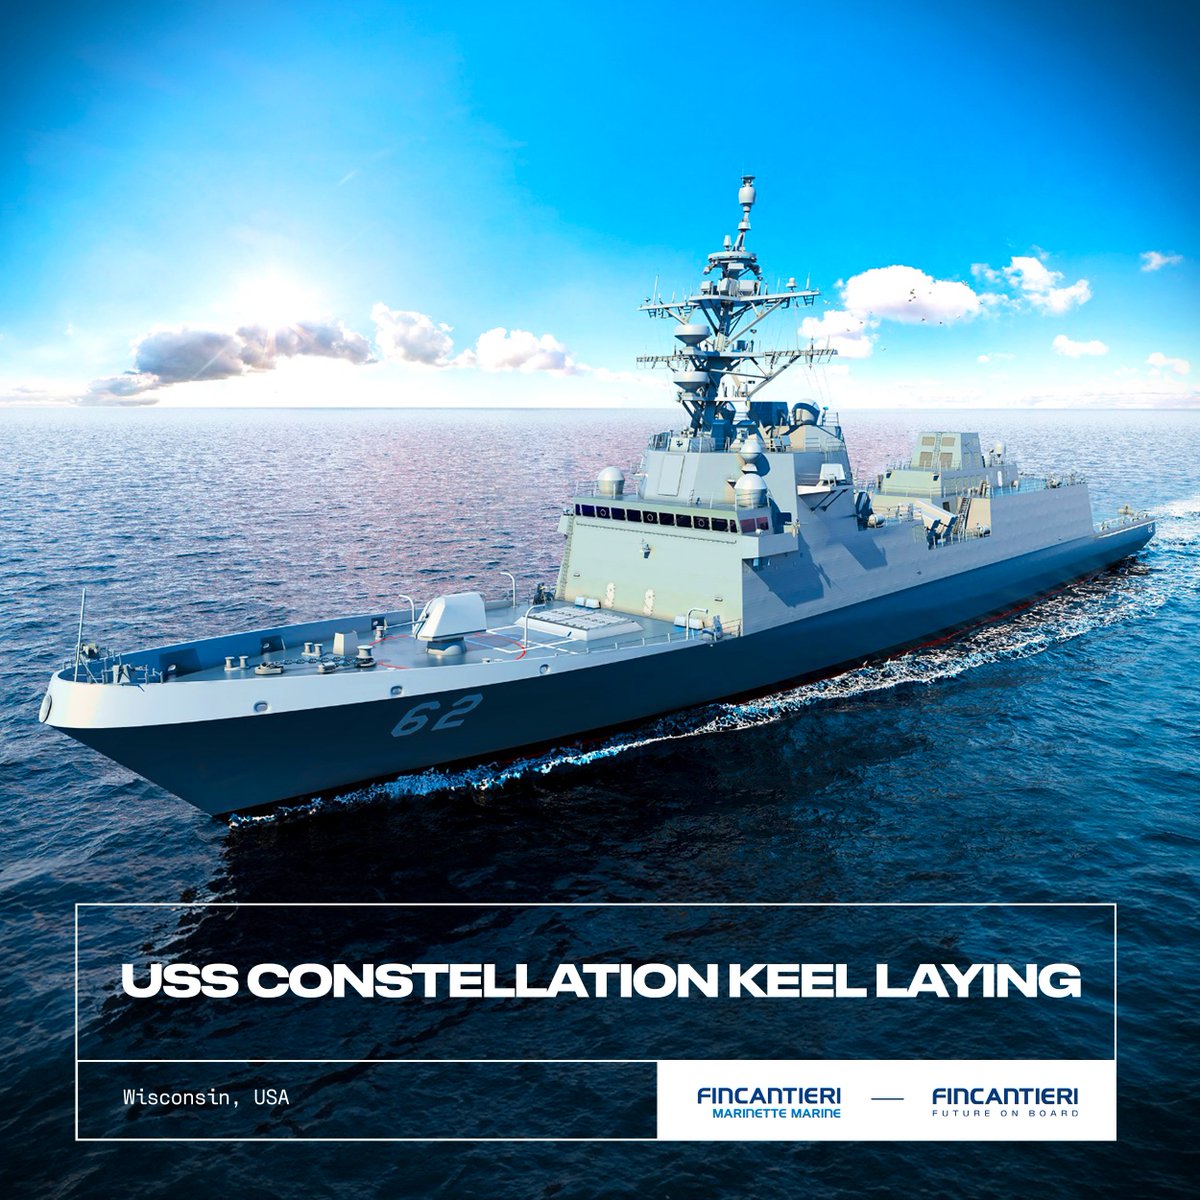 Our U.S. subsidiary @FincantieriUS celebrated a momentous achievement on Friday. 👏 The keel laying ceremony of the future USS Constellation (FFG-62), a guided-missile frigate which is being built for the U.S. Navy at the Fincantieri Marinette Marine shipyard in Marinette,…